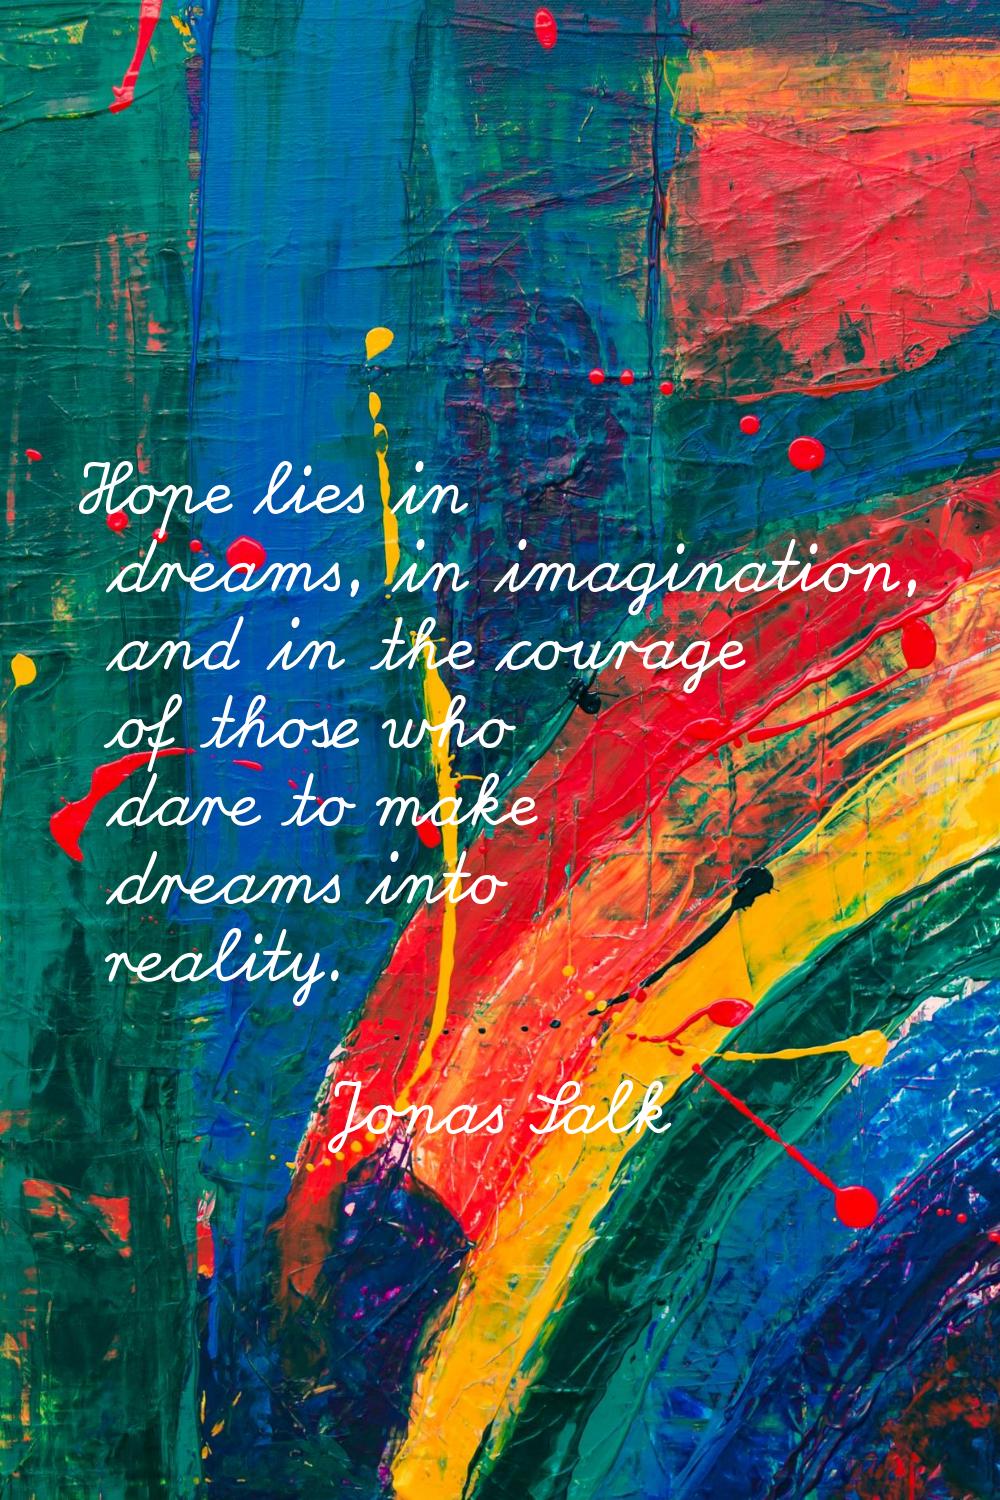 Hope lies in dreams, in imagination, and in the courage of those who dare to make dreams into reali